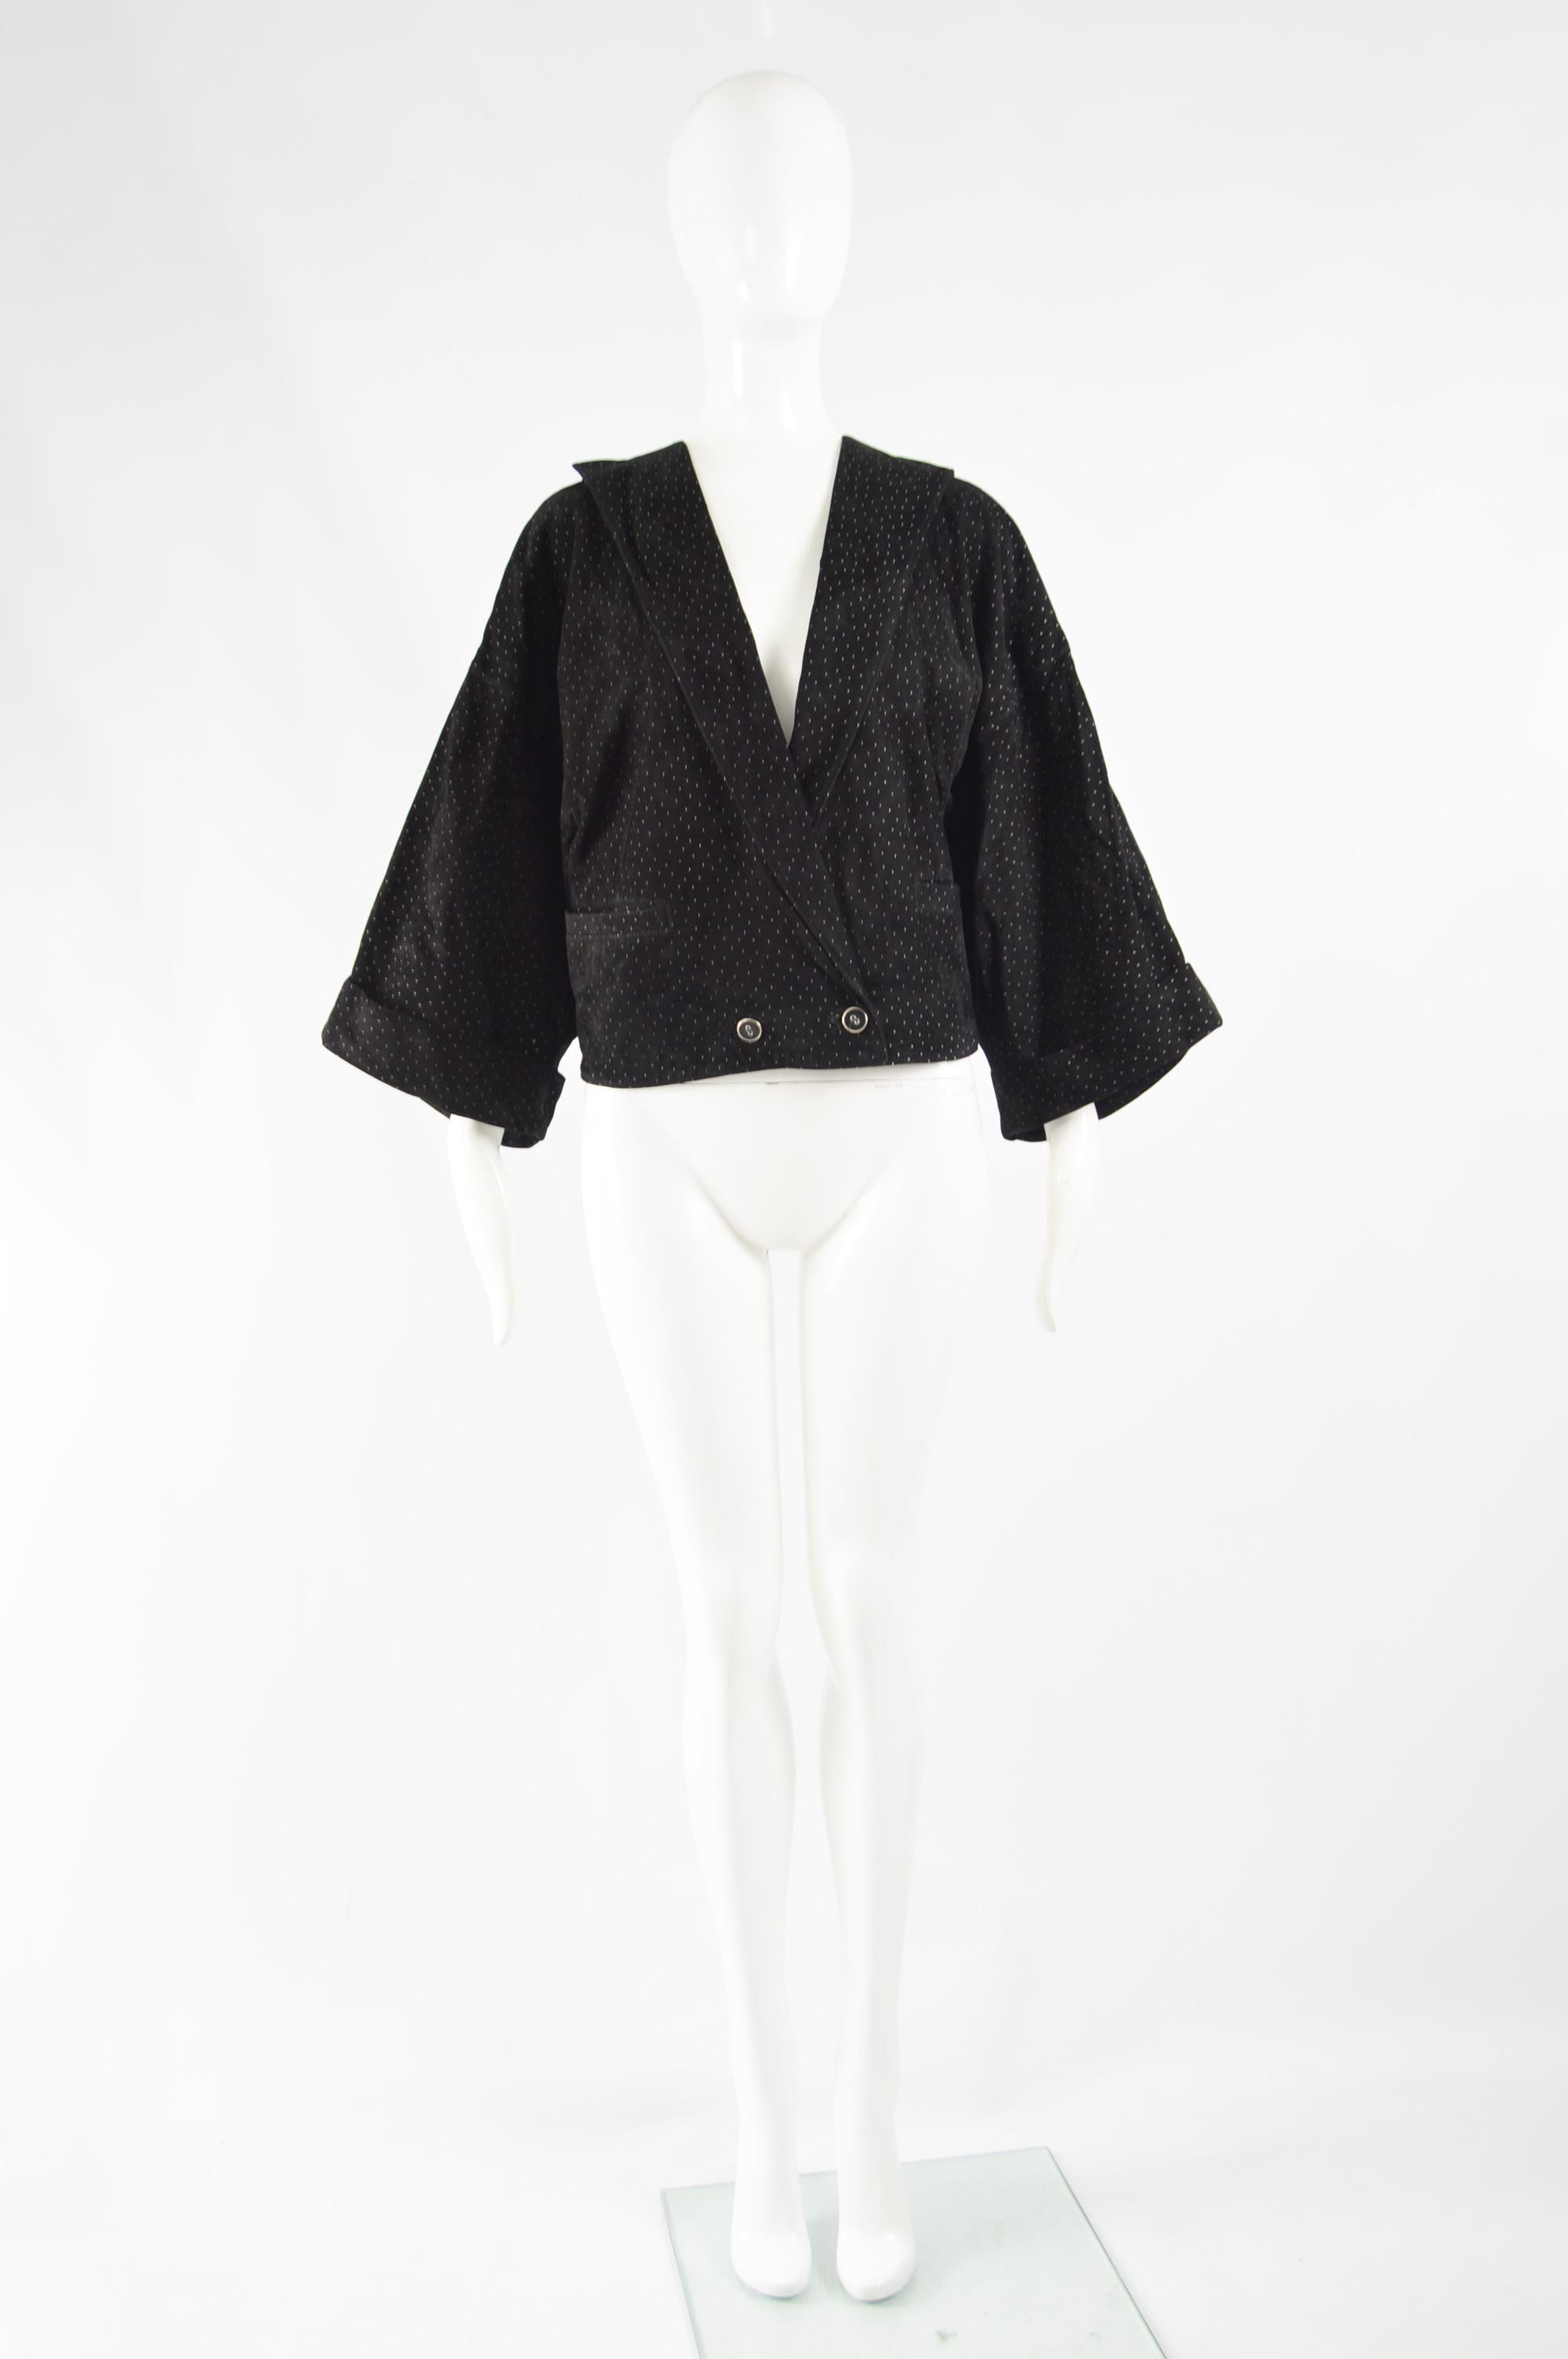 A fabulous vintage womens Gianni Versace womens suede jacket from the 80s. This wide sleeved jacket is a great example of Gianni's earlier work which was much more focused on interesting, oversized silhouettes than his later focus on bold  pop art